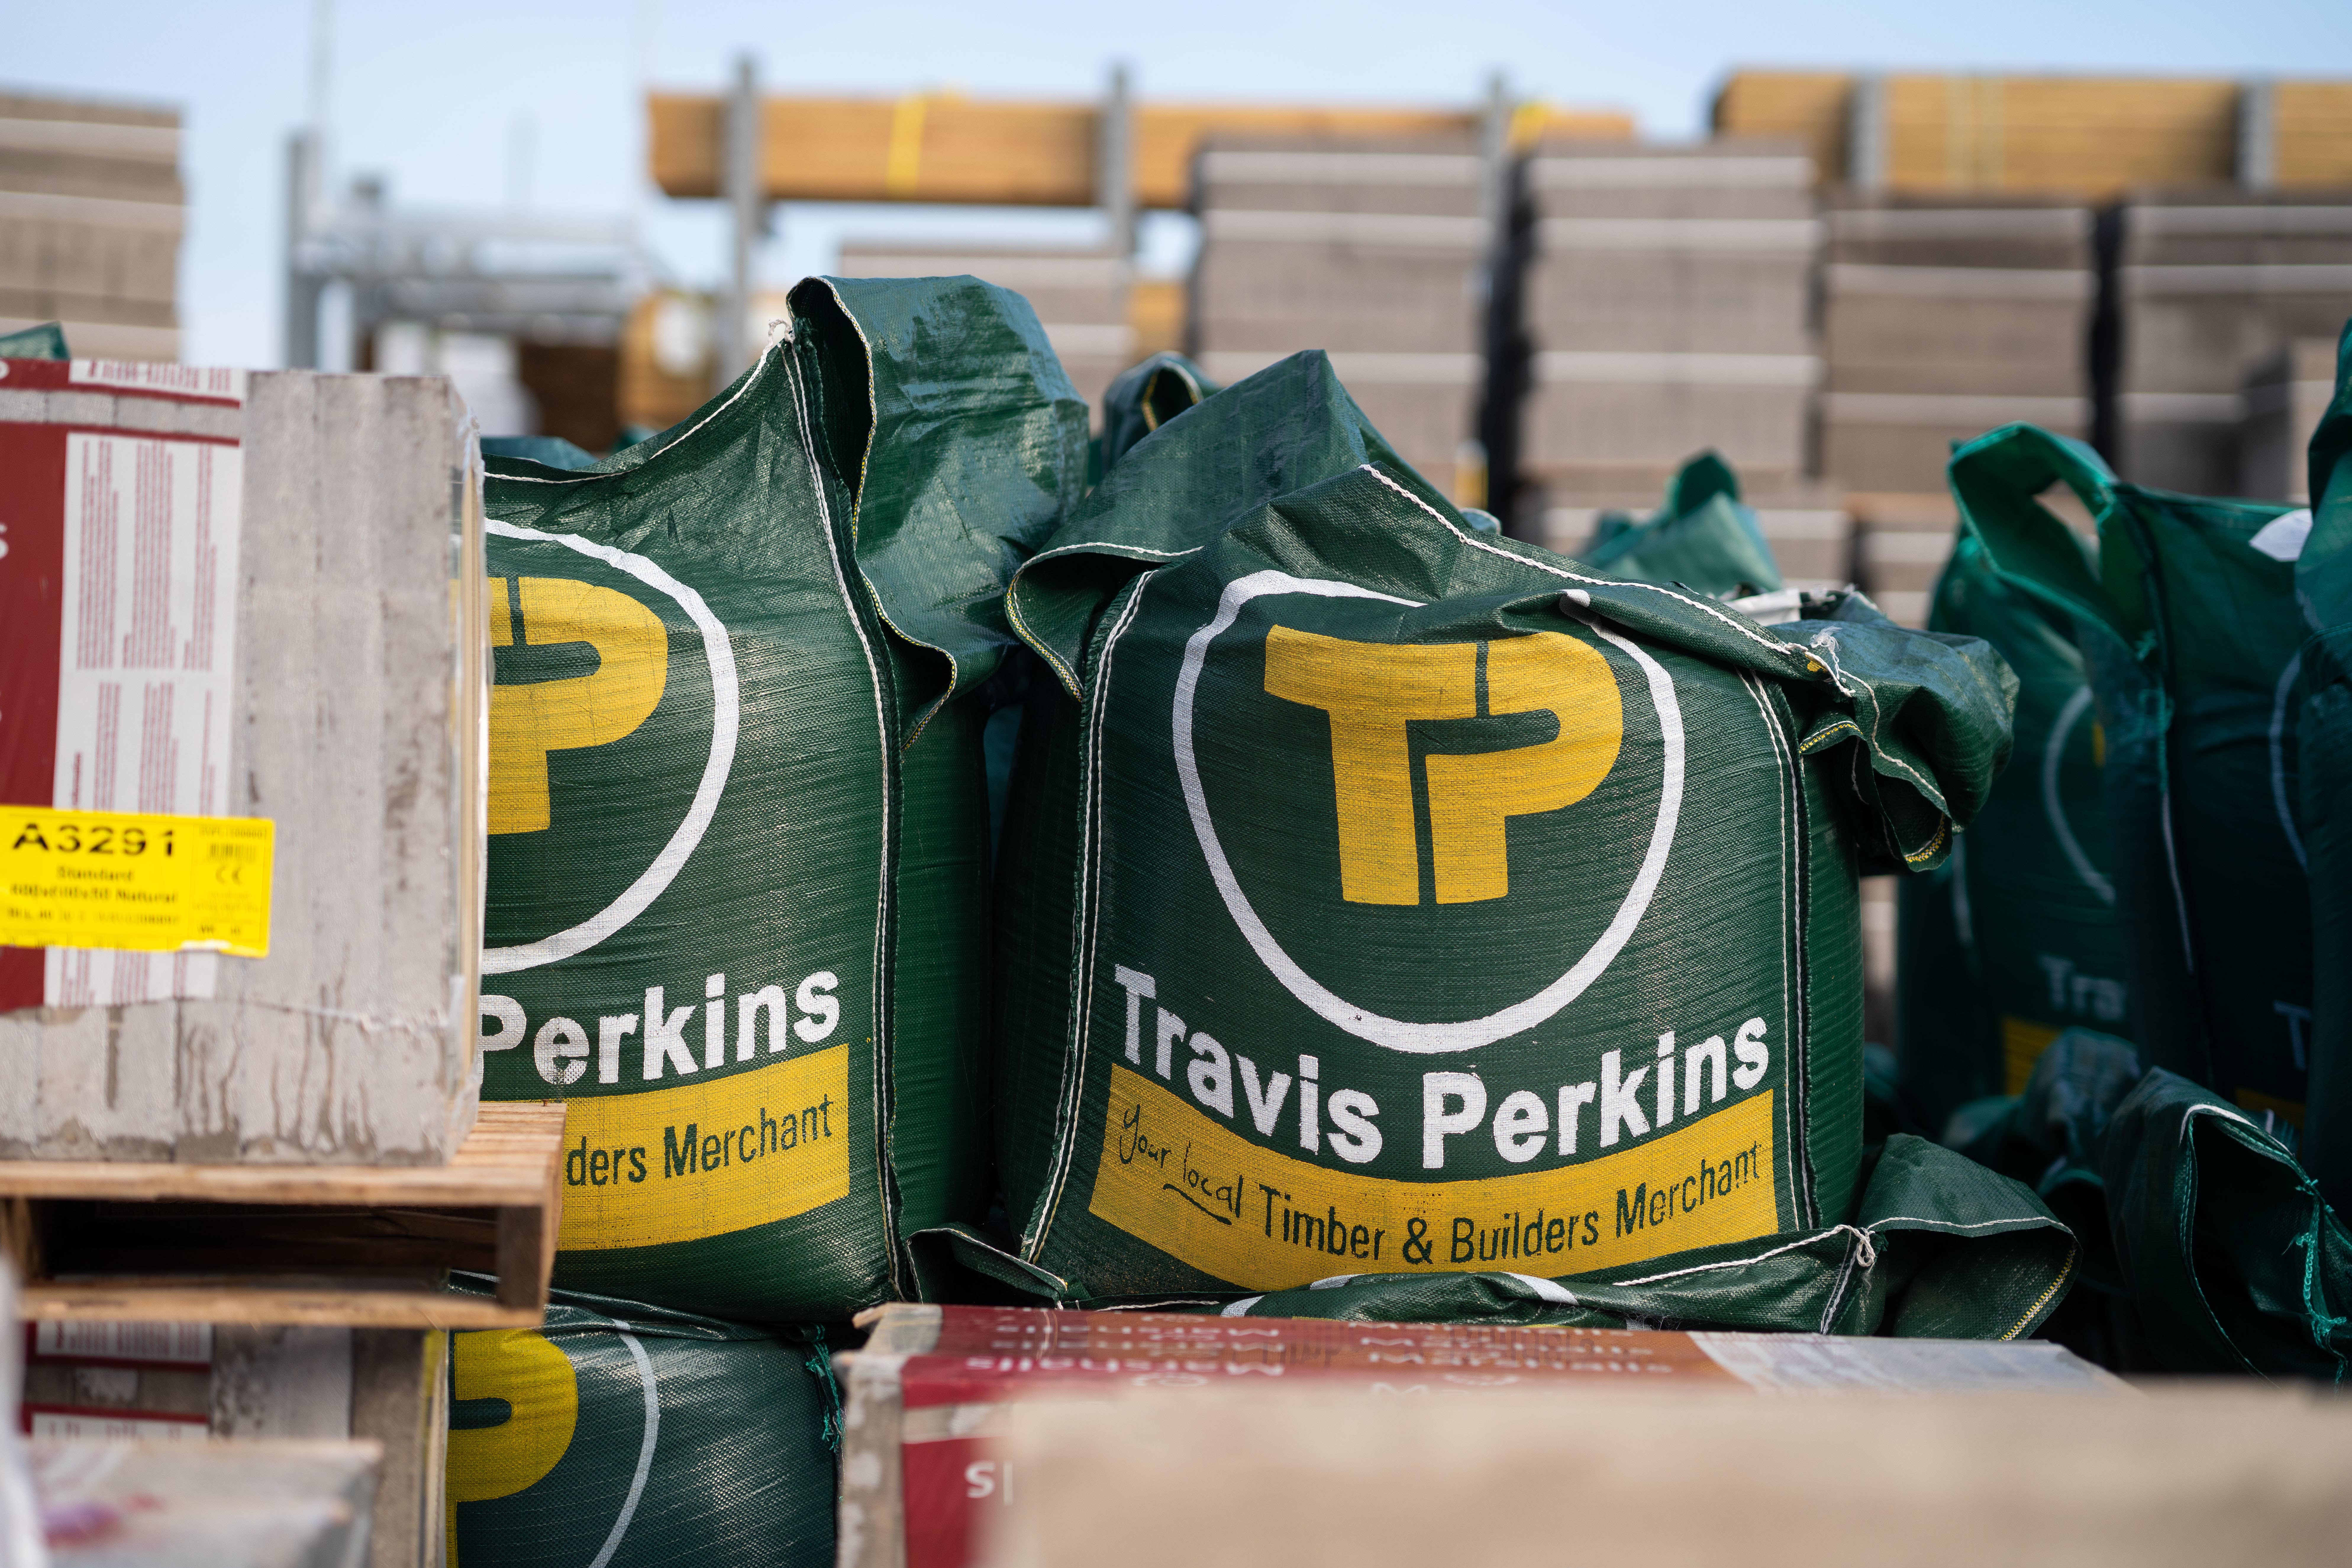 Travis Perkins sets out plan to train 10,000 apprentices | The Independent